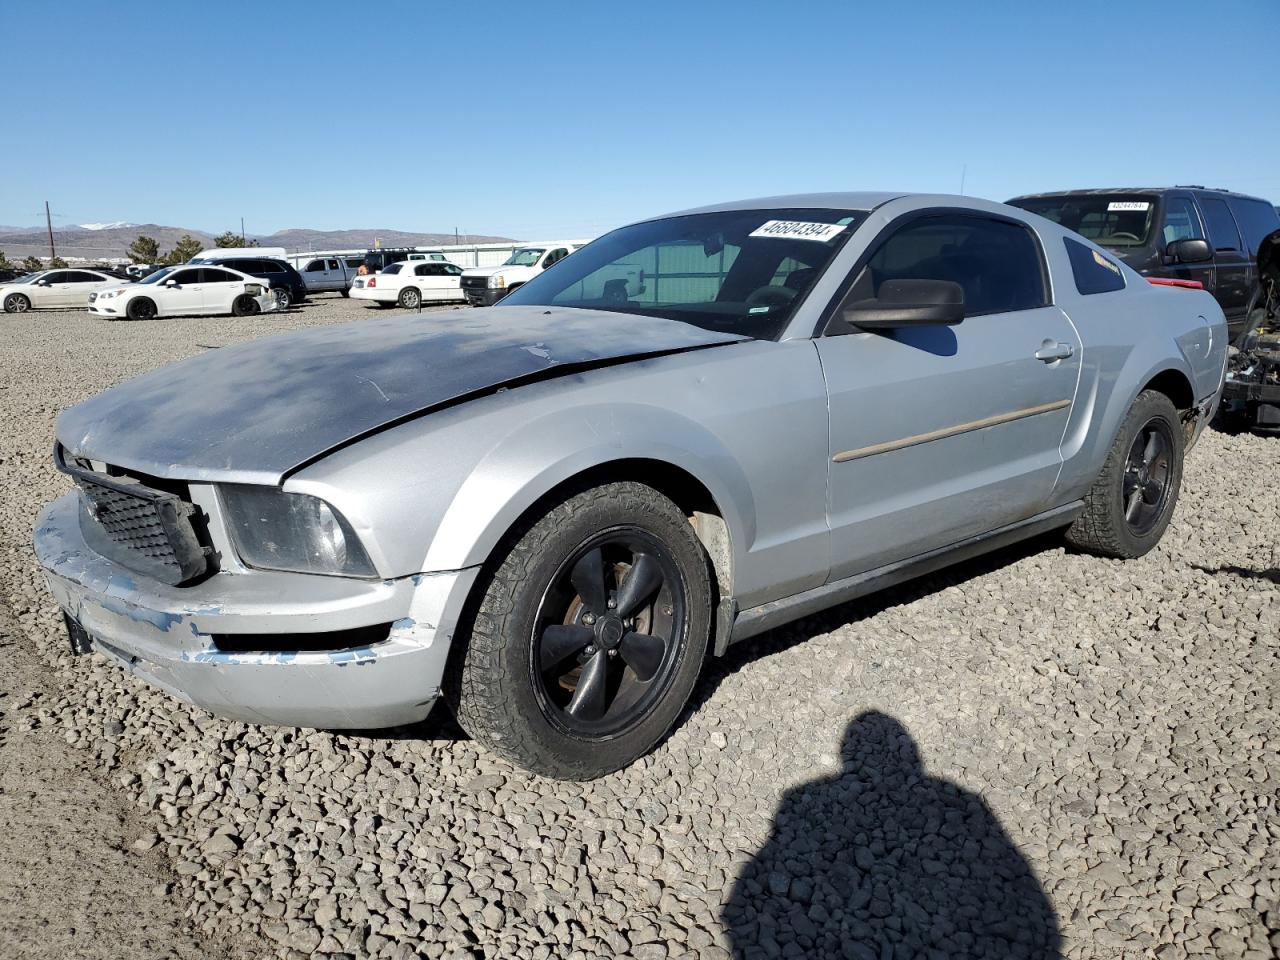 vin: 1ZVFT80N975347218 1ZVFT80N975347218 2007 ford mustang 4000 for Sale in 89506 9148, Nv - Reno, Reno, USA